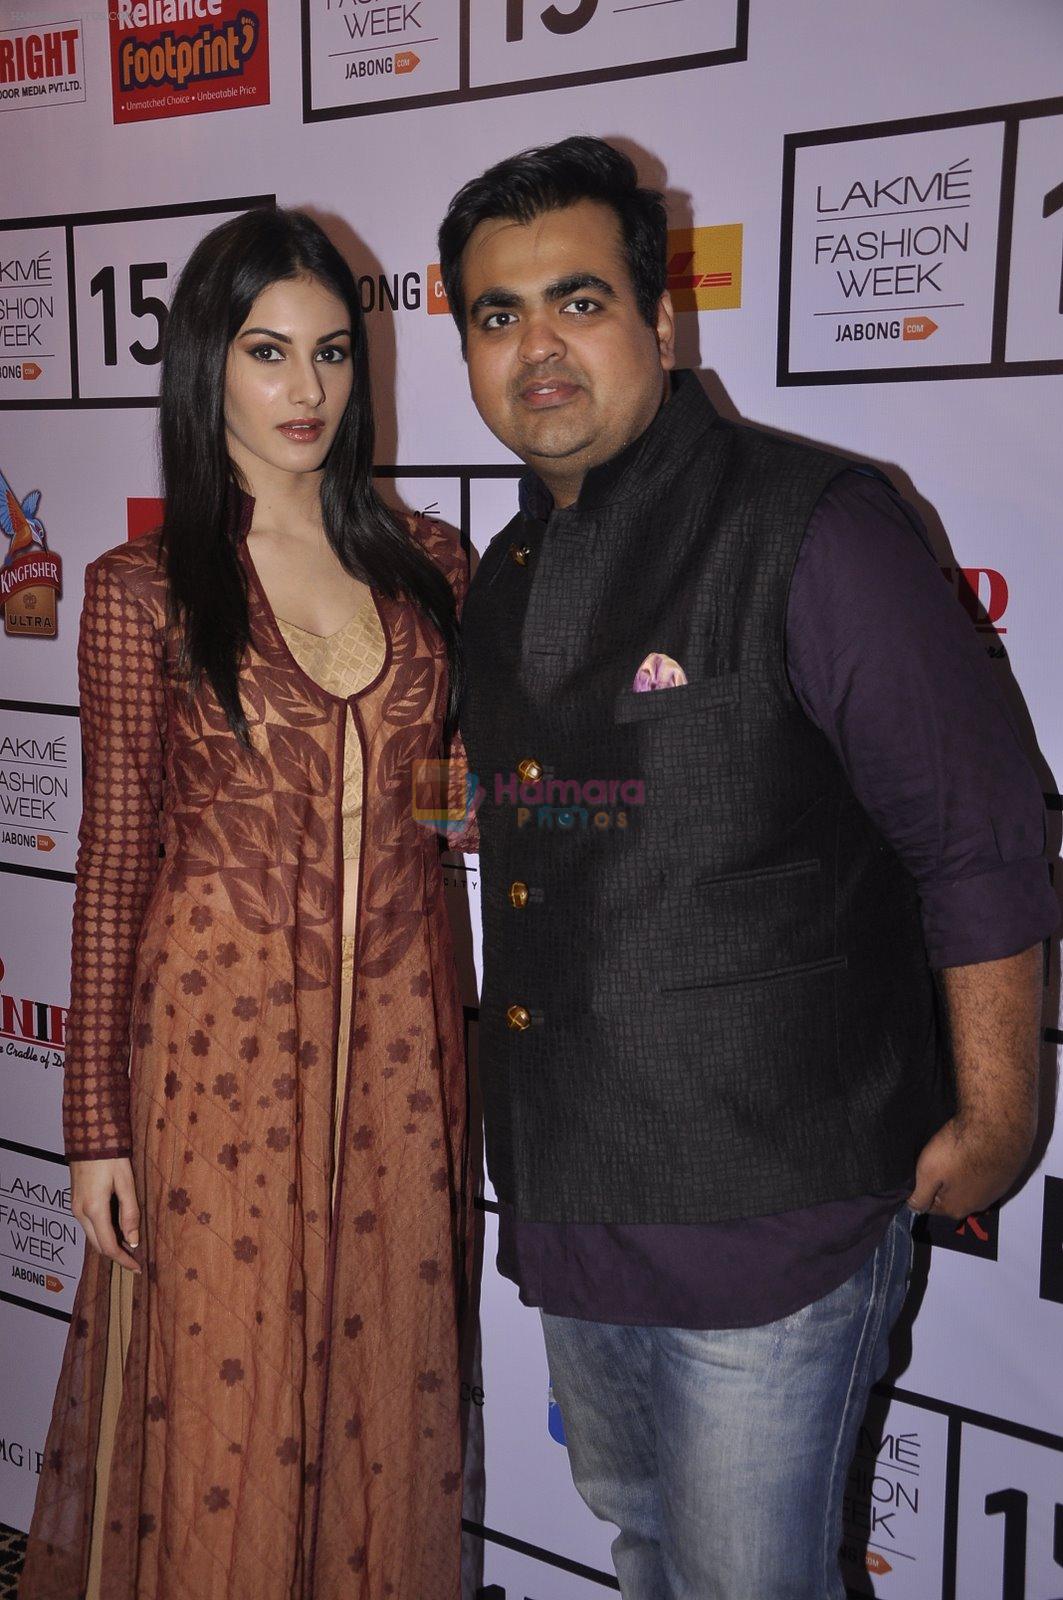 Amyra Dastur on Day 5 at Lakme Fashion Week 2015 on 22nd March 2015